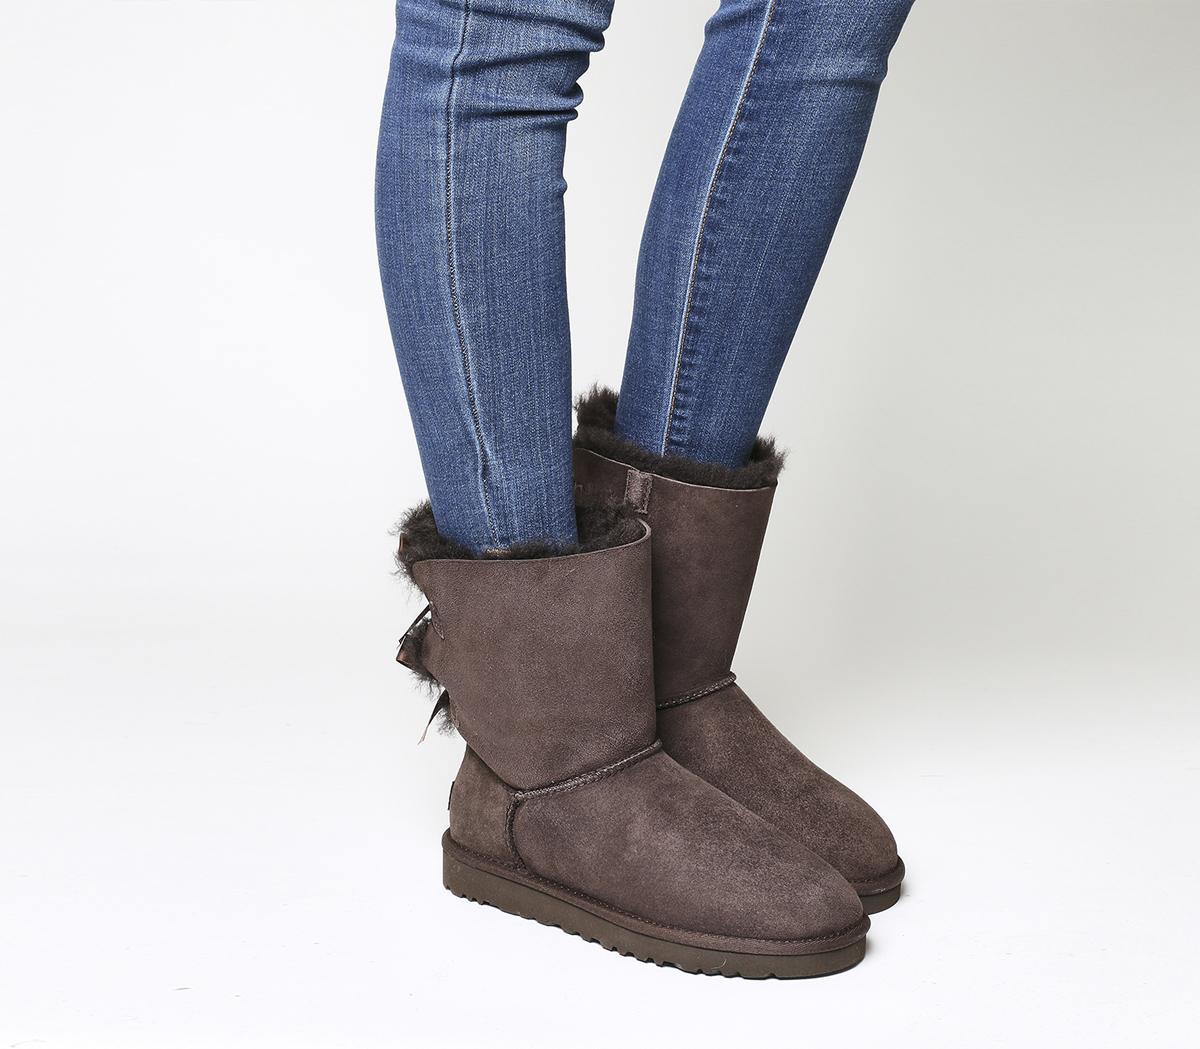 knee high ugg boots with bow